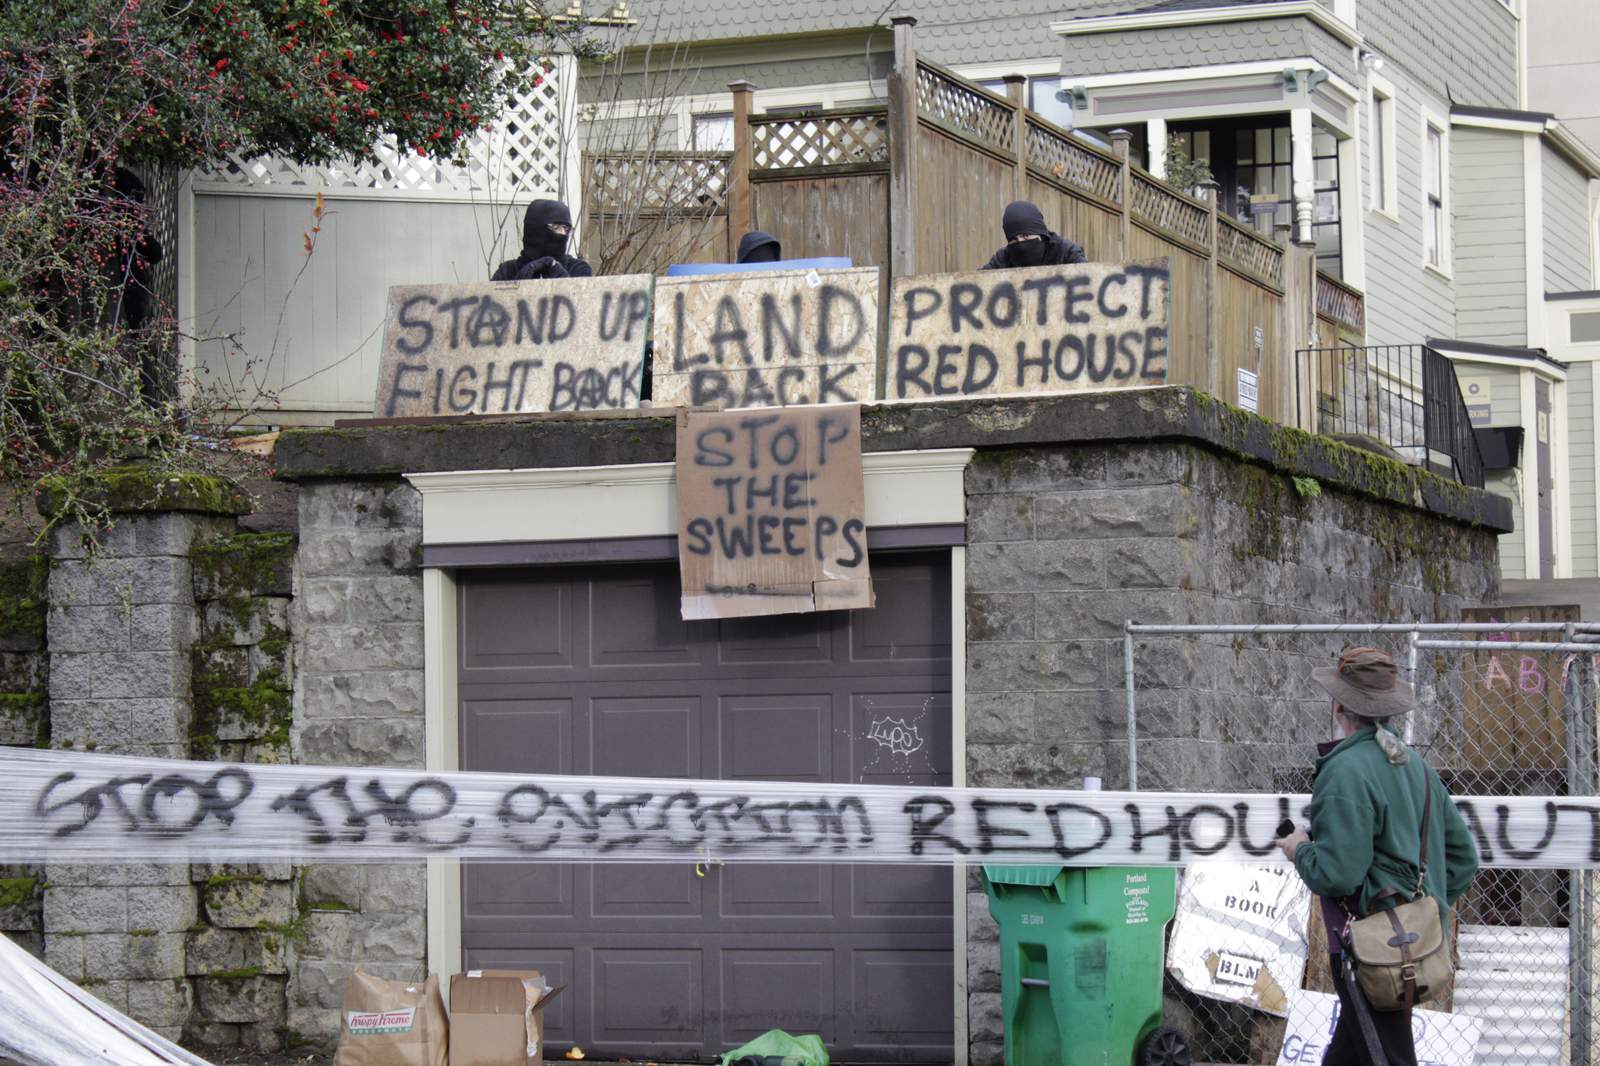 Oregon eviction protest fueled by history of gentrification